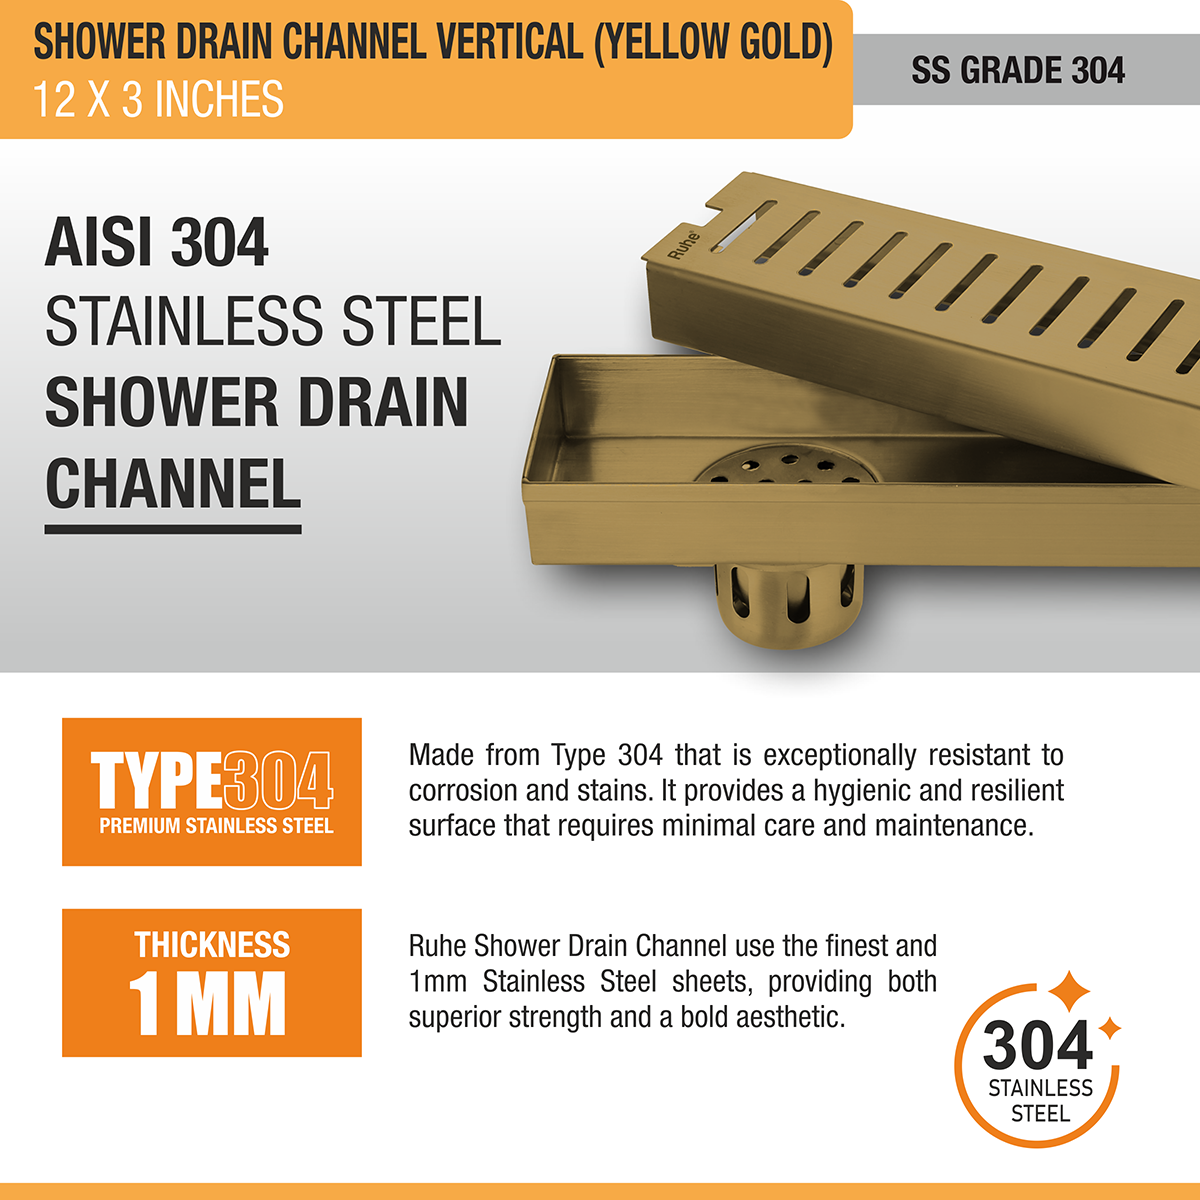 Vertical Shower Drain Channel (12 x 3 Inches) YELLOW GOLD stainless steel